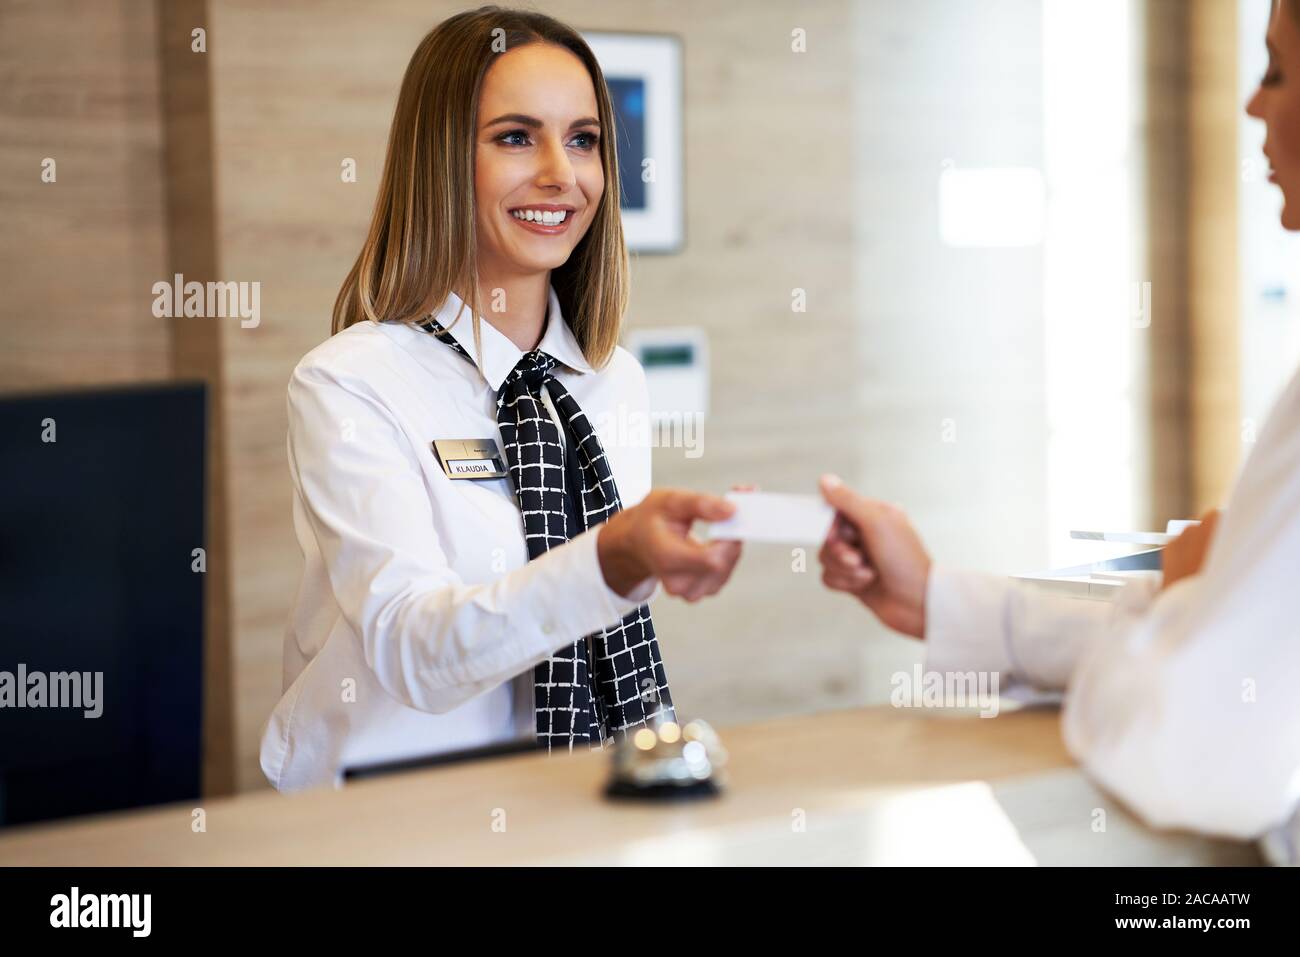 Receptionist Giving Key Card To Businesswoman At Hotel Front Desk